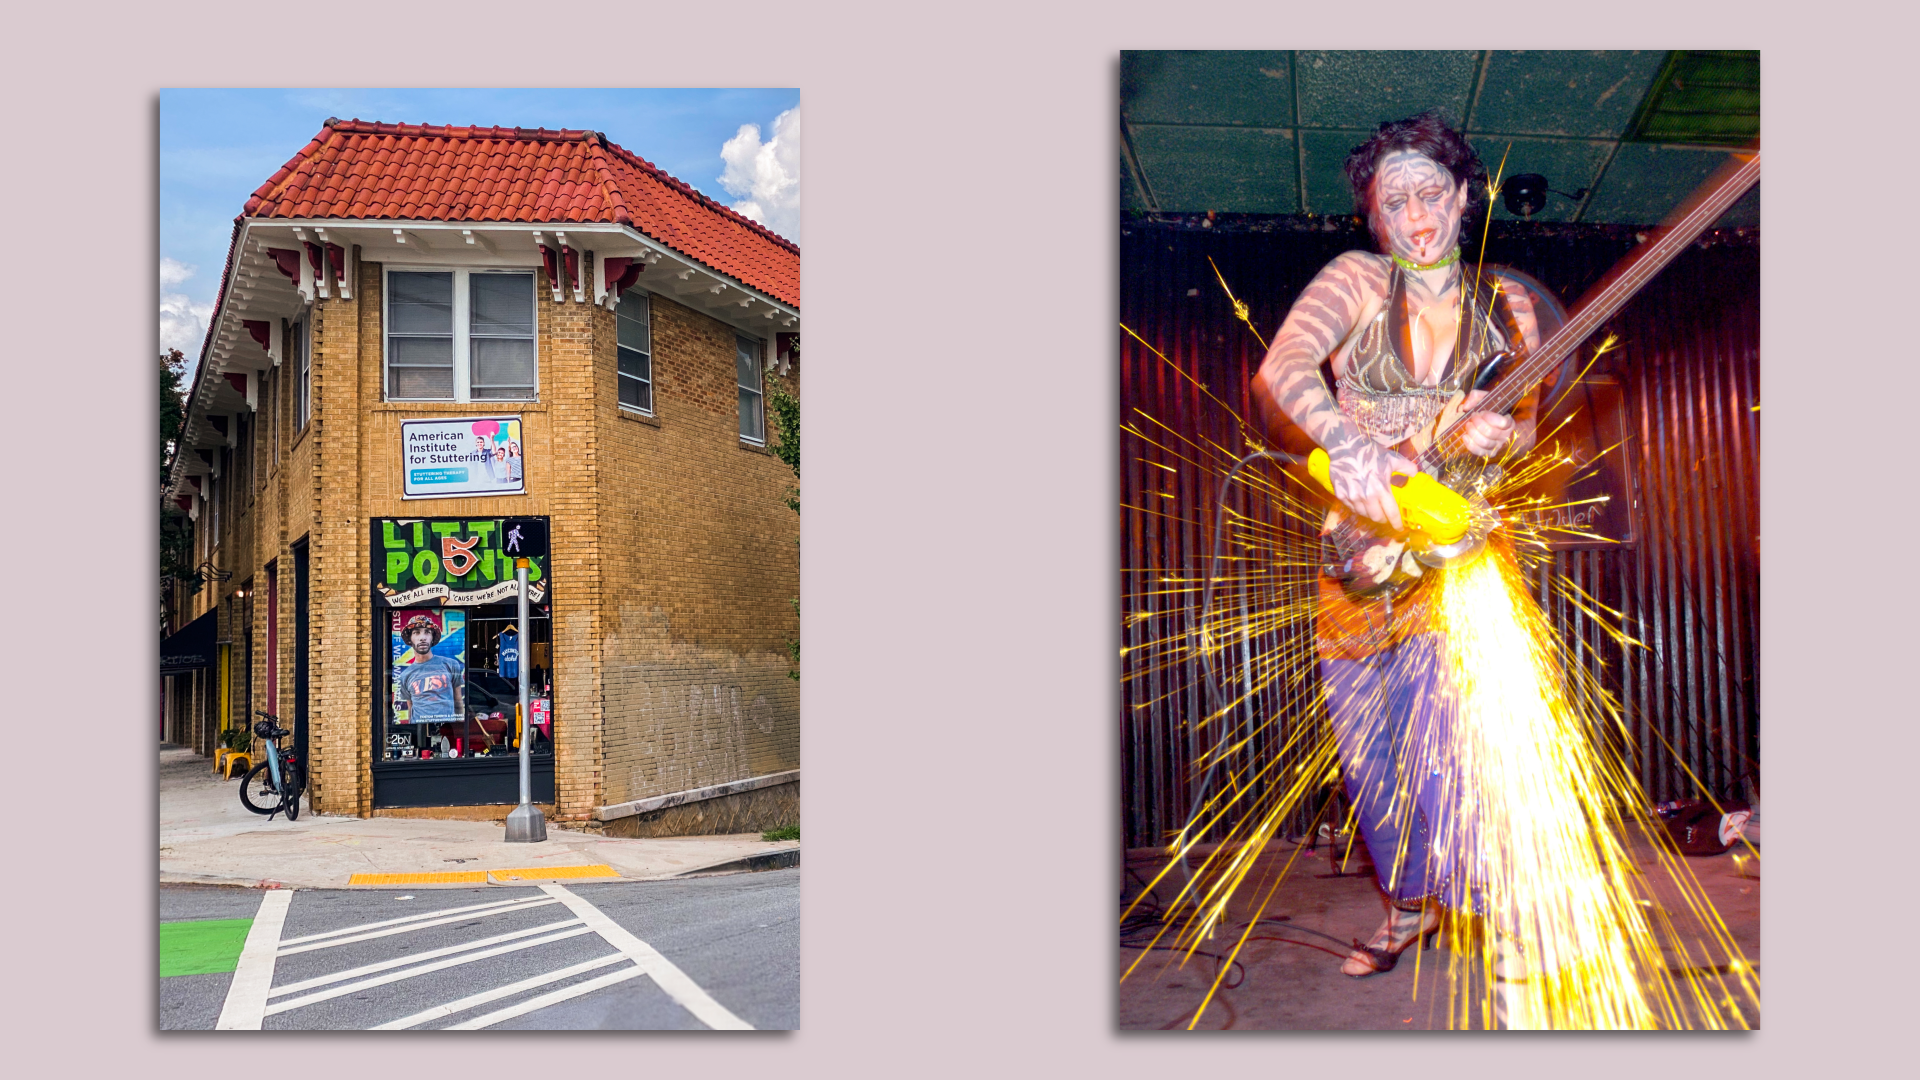 A photo of a brick building with terra cotta roof tiles and a sign that says "Little Five Points" and a photo of tattooed woman using an angle grinder to make sparks on a guitar